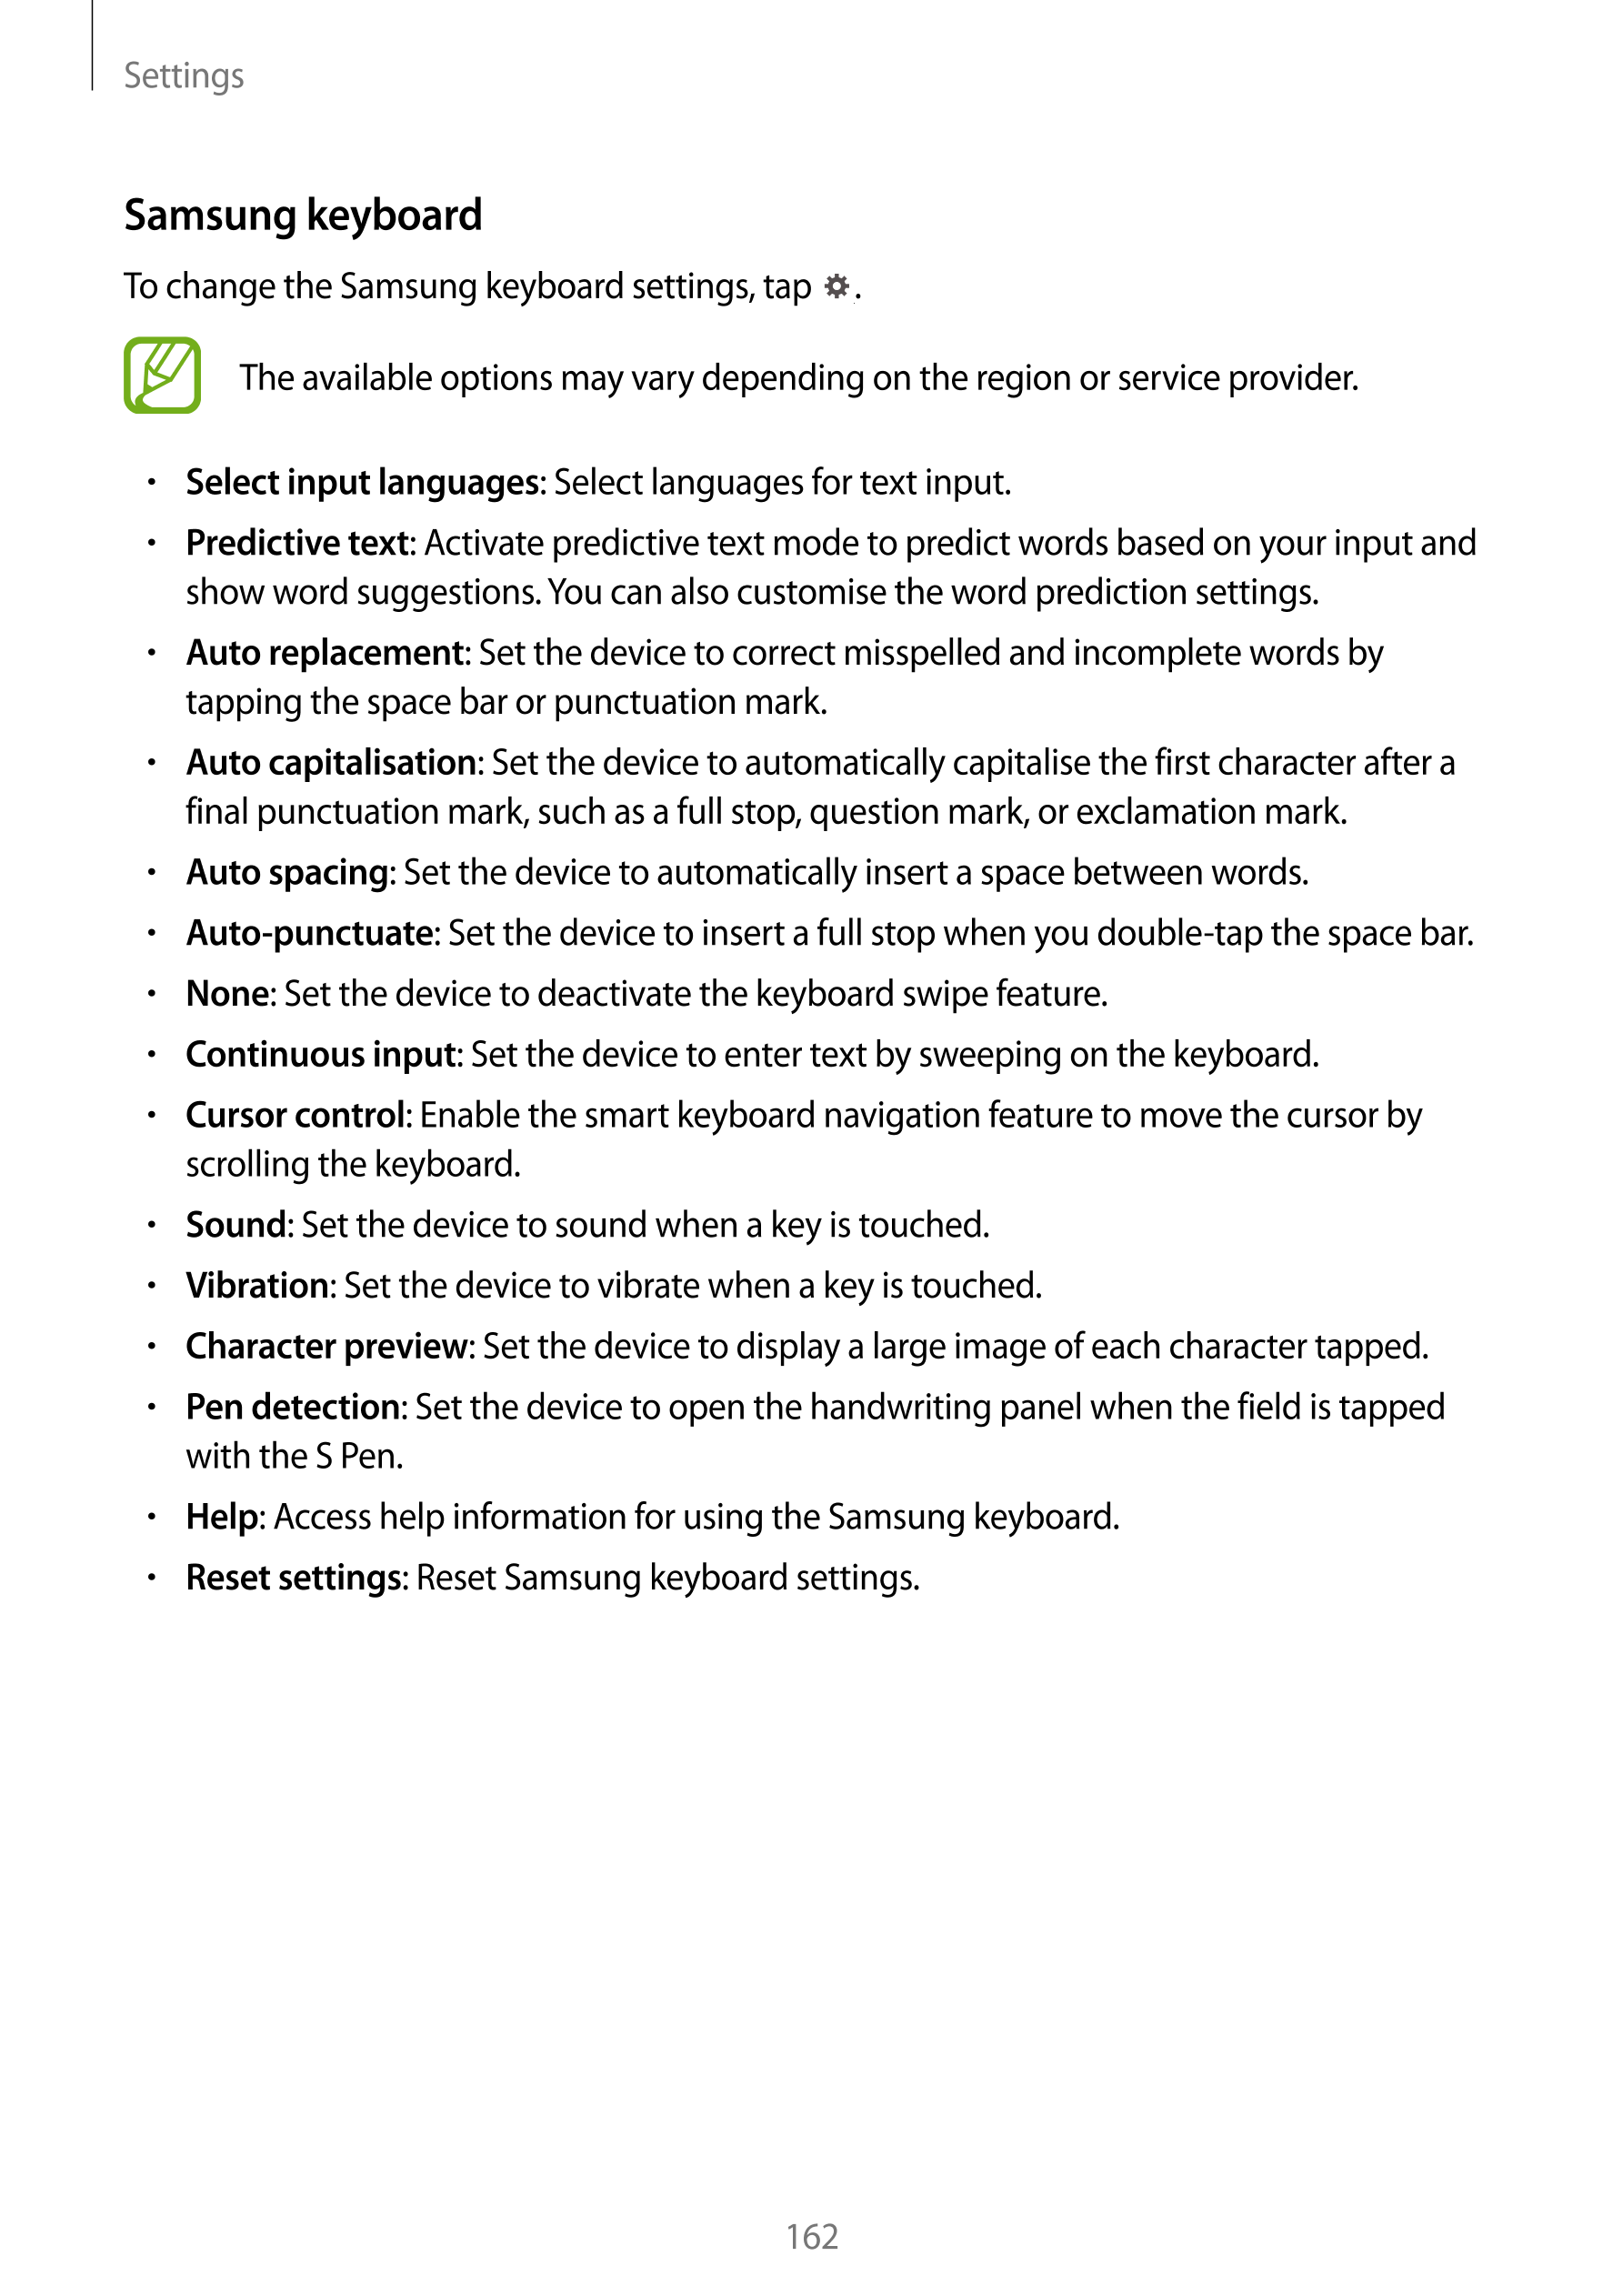 Settings
Samsung keyboard
To change the Samsung keyboard settings, tap  .
The available options may vary depending on the region